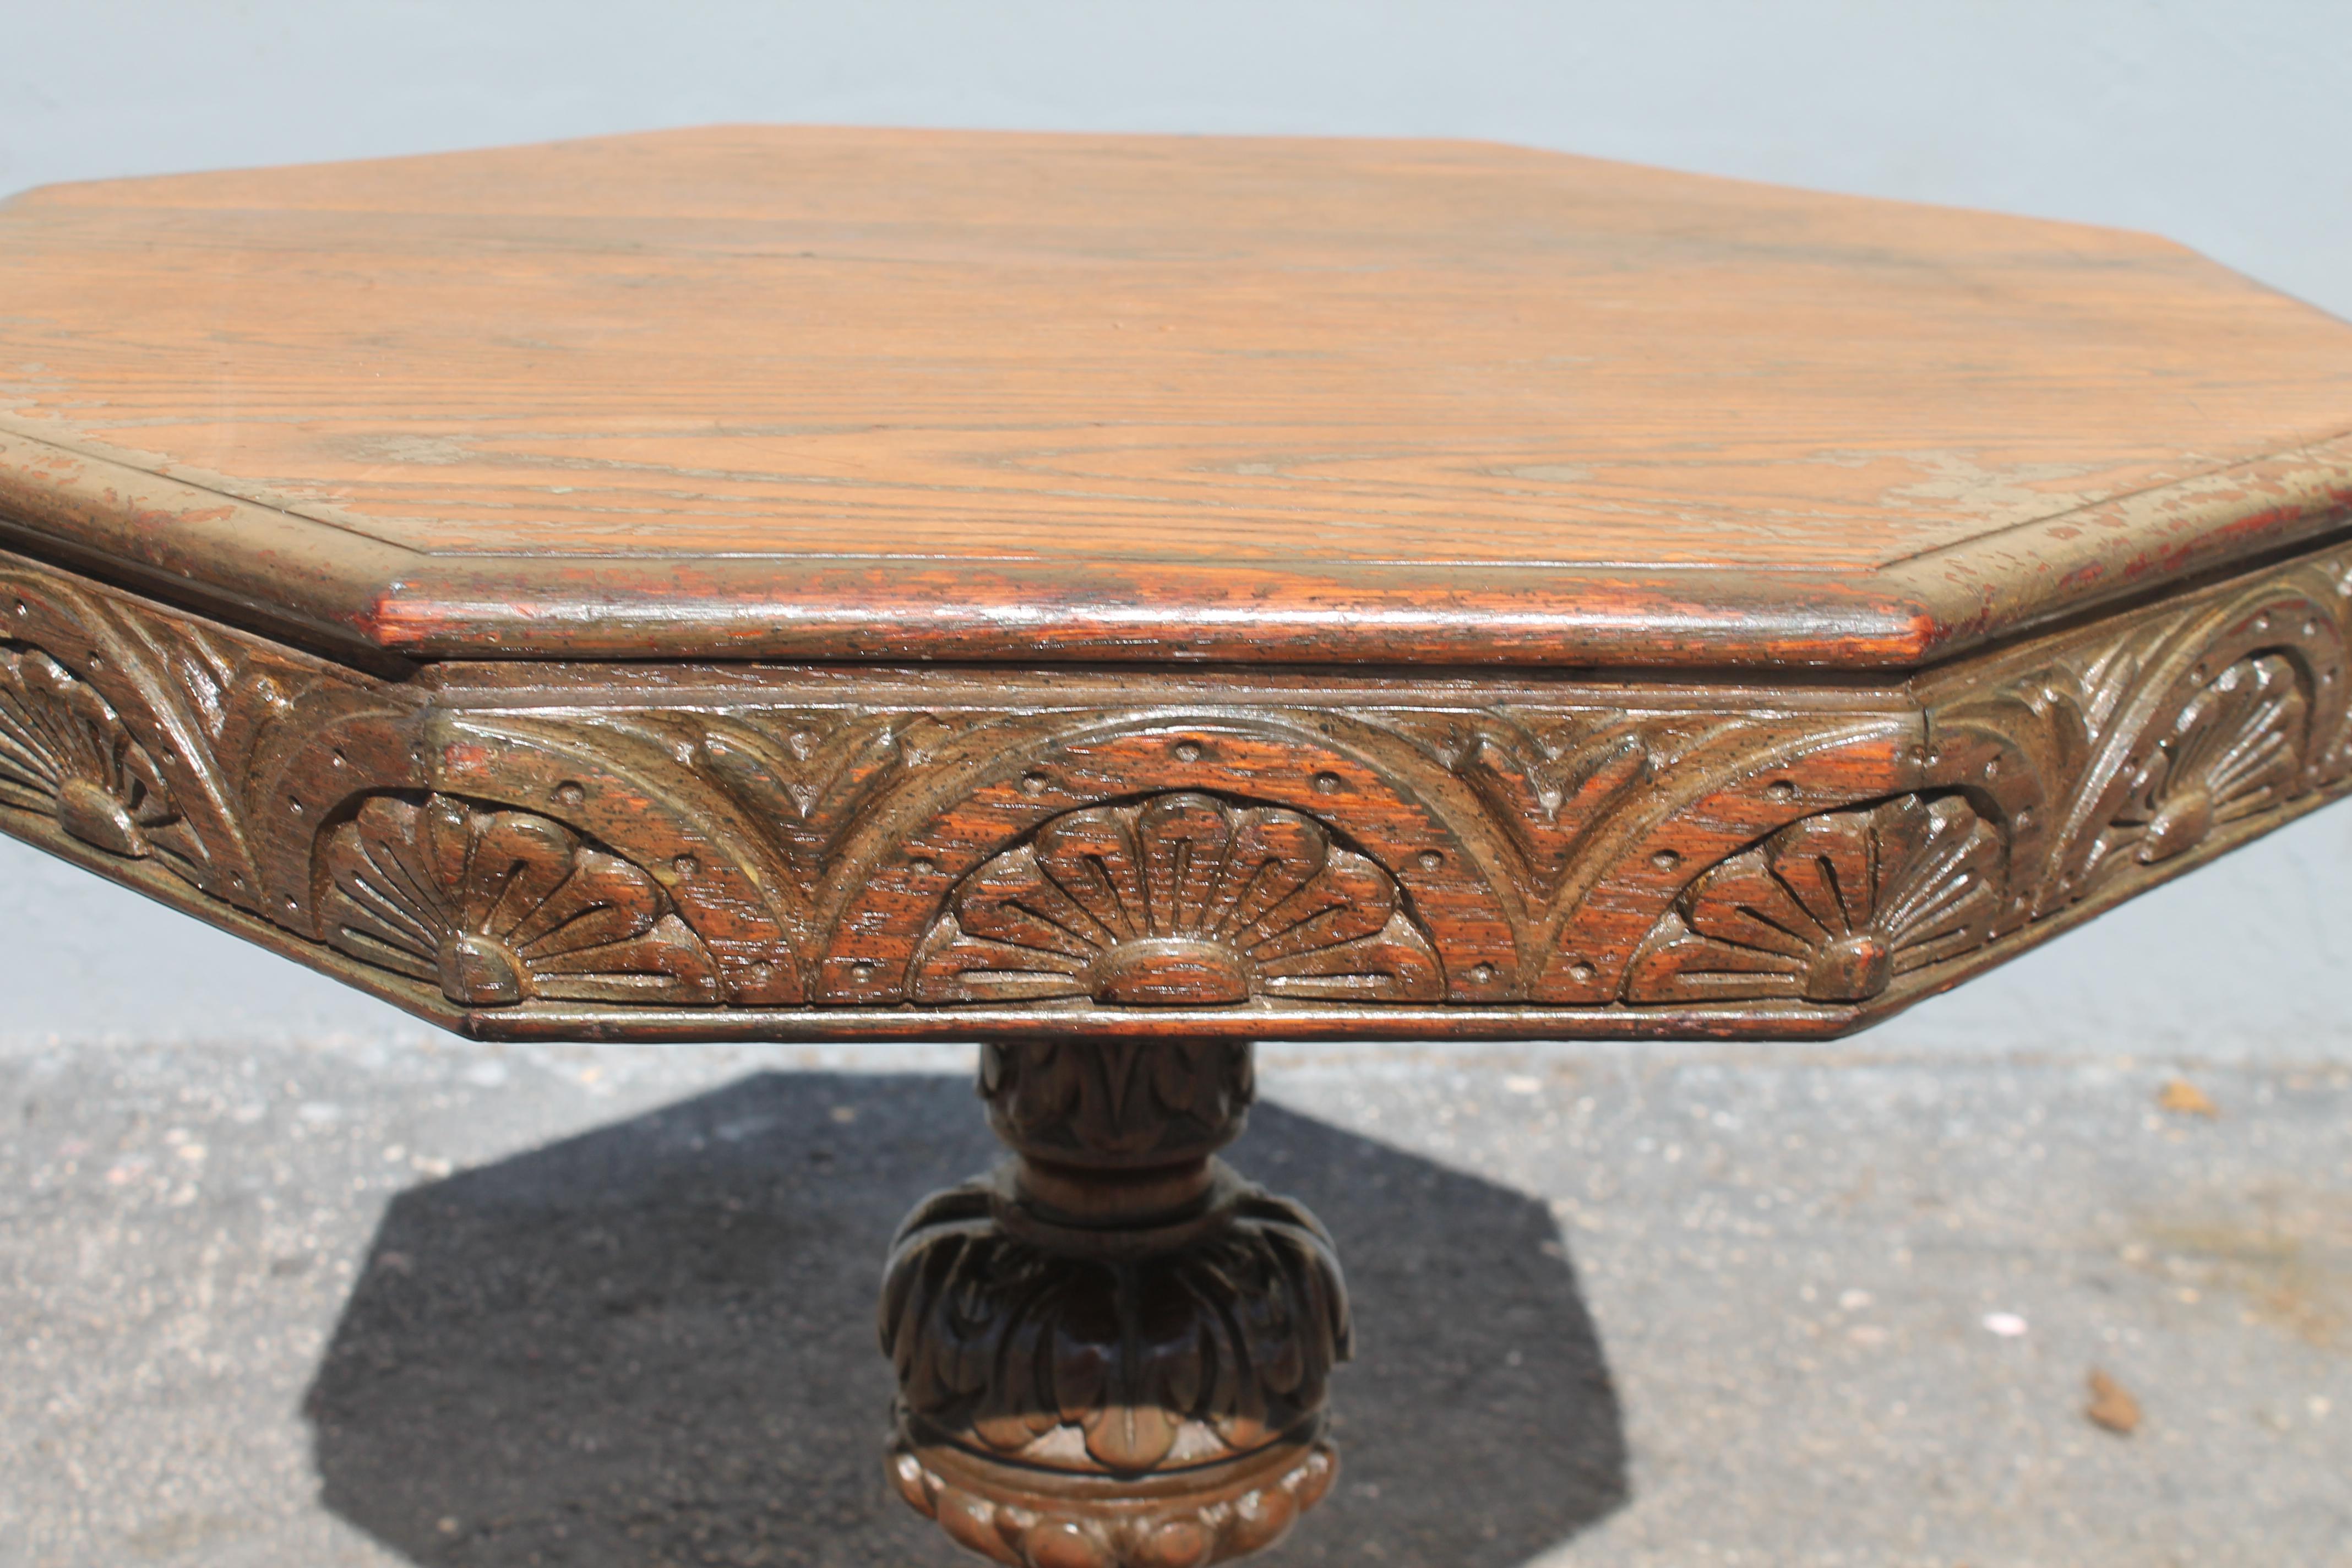 19thc French Rennaisance Revival Carved Center Table + Pair Chairs  Set of 3 pcs In Good Condition For Sale In Opa Locka, FL